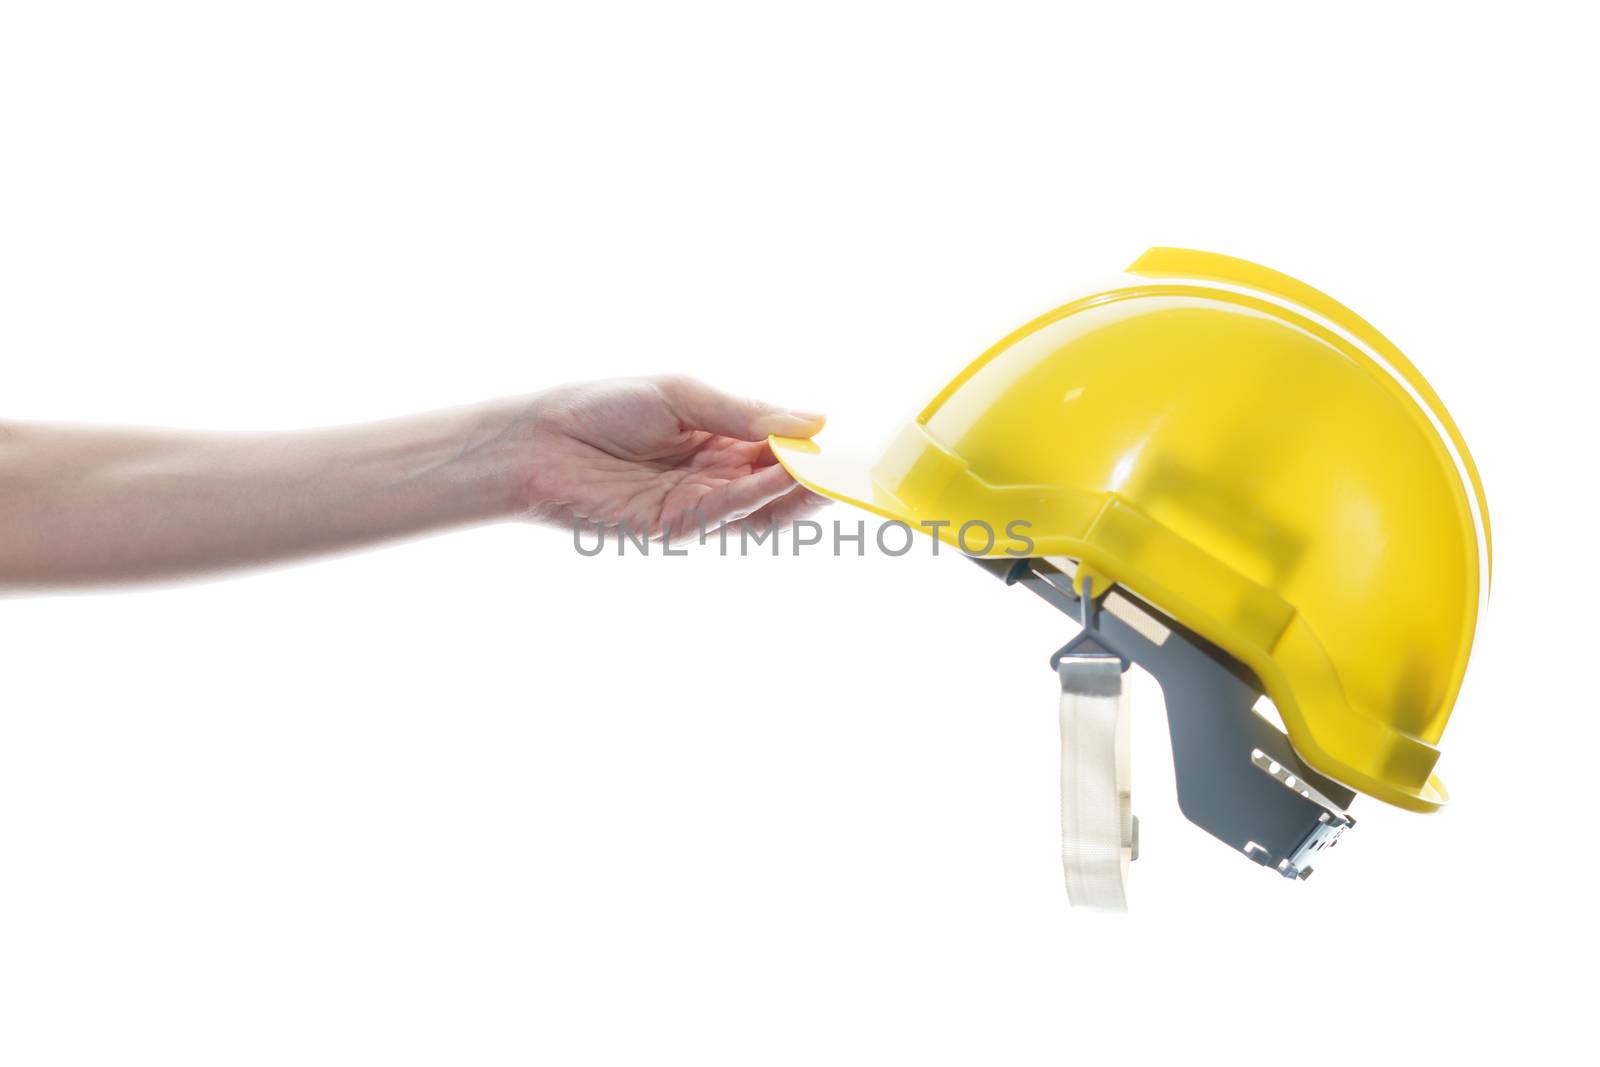 Woman hand holding yellow safety helmet isolated on white background.